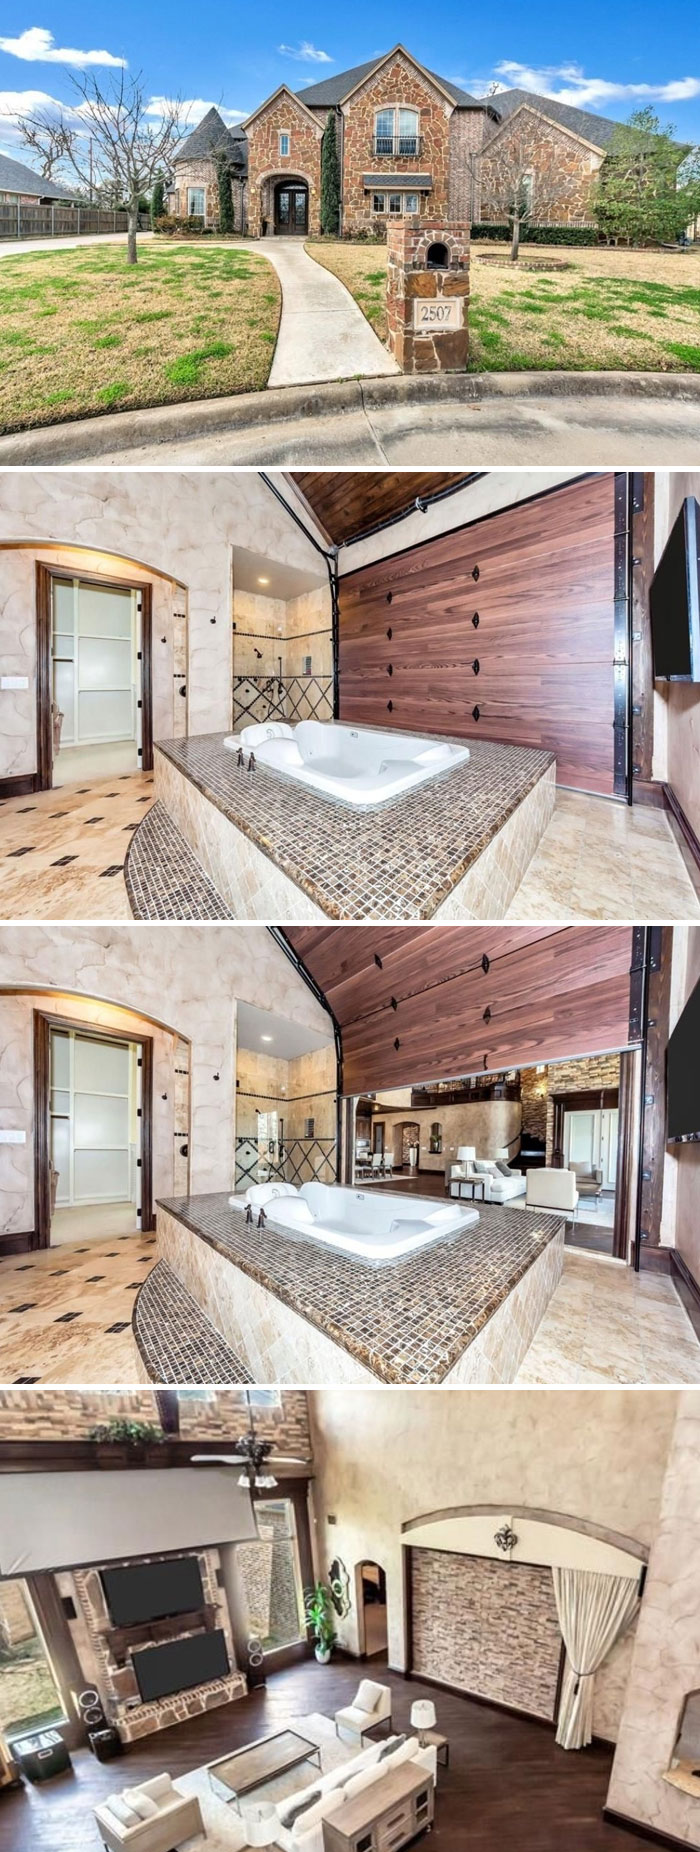 Alright, This House Has One Of The Weirdest Features I've Ever Seen, Which Is Saying Something: It Has A Garage Door. In The Master Bathroom. That Opens To The Family Room. Do With That What You Will